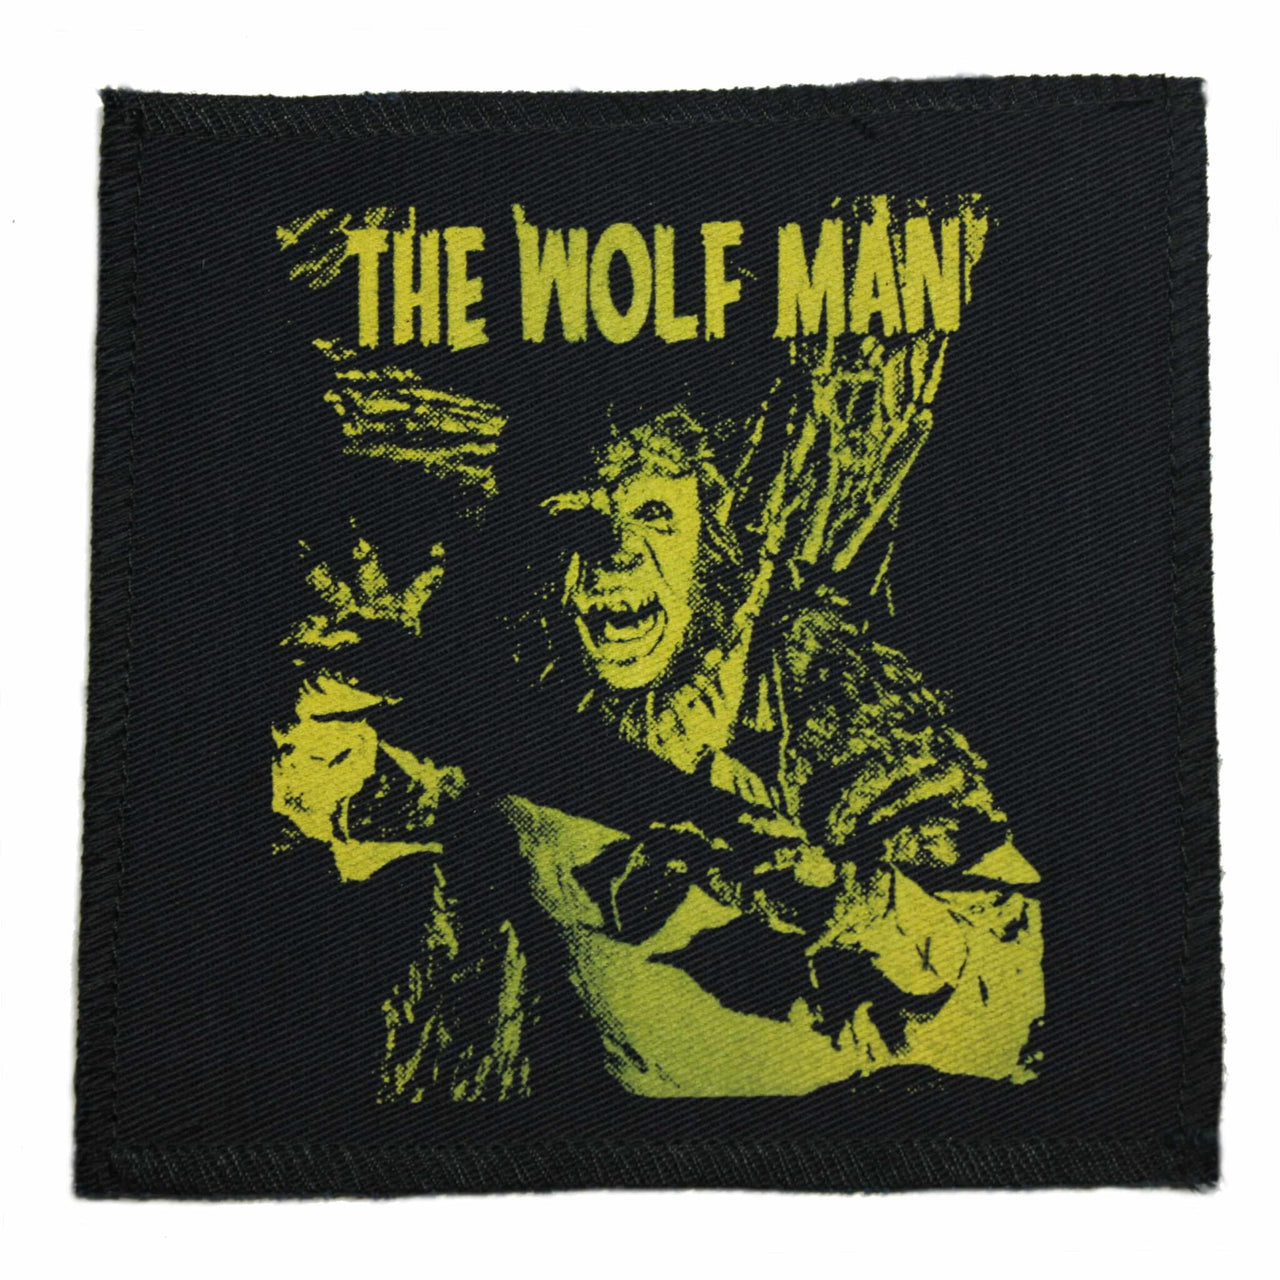 The Wolf Man Cloth Patch